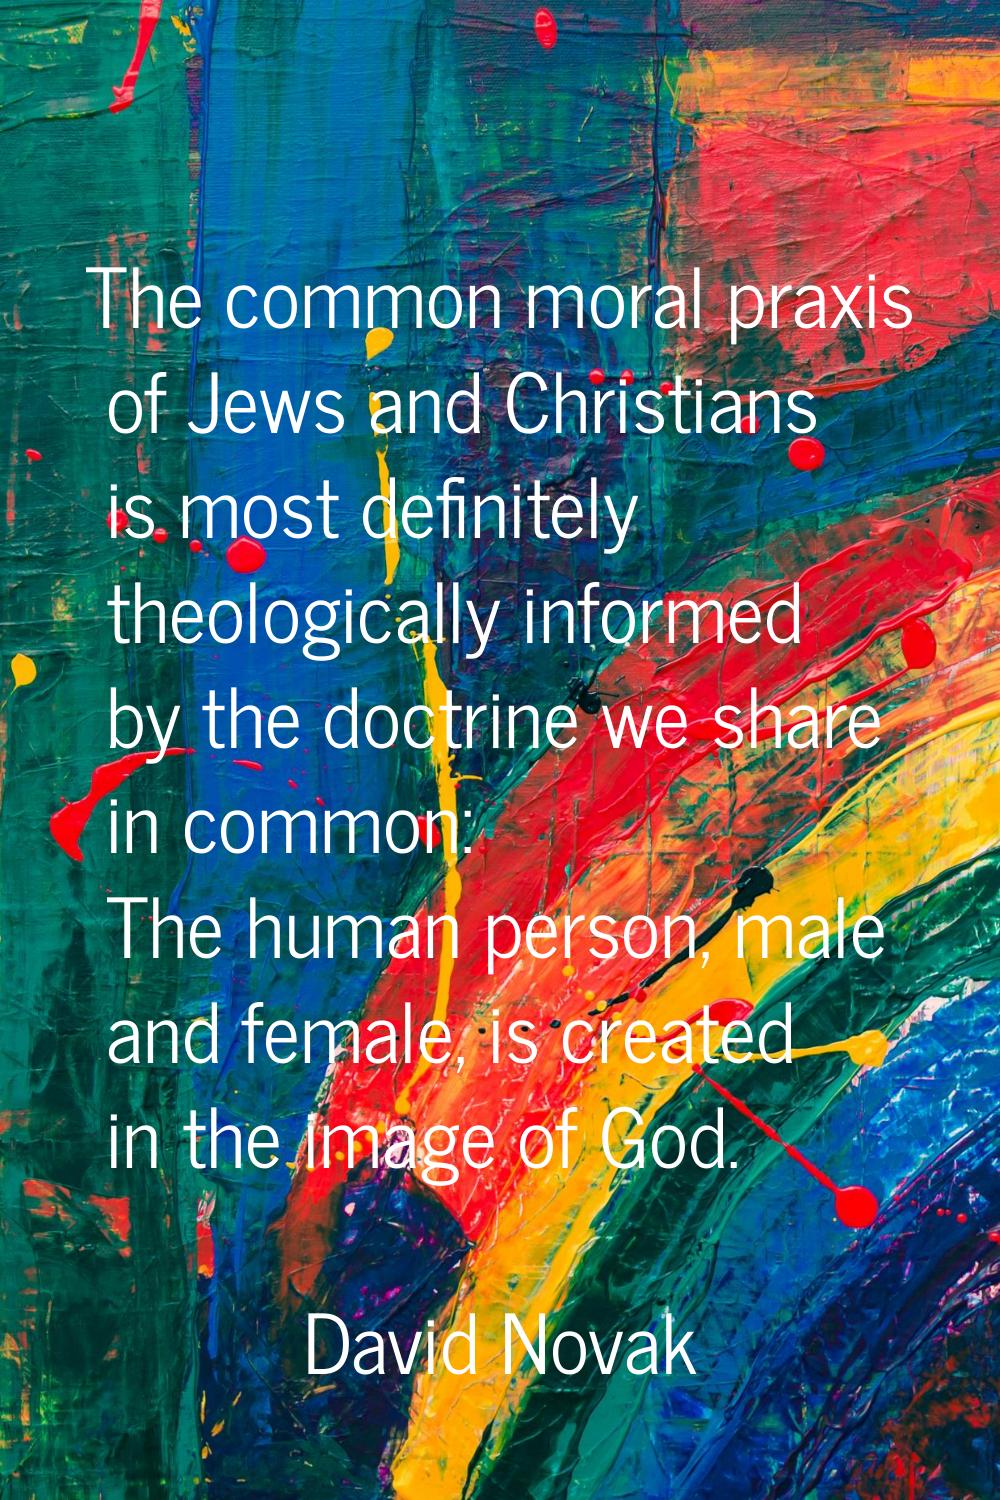 The common moral praxis of Jews and Christians is most definitely theologically informed by the doc